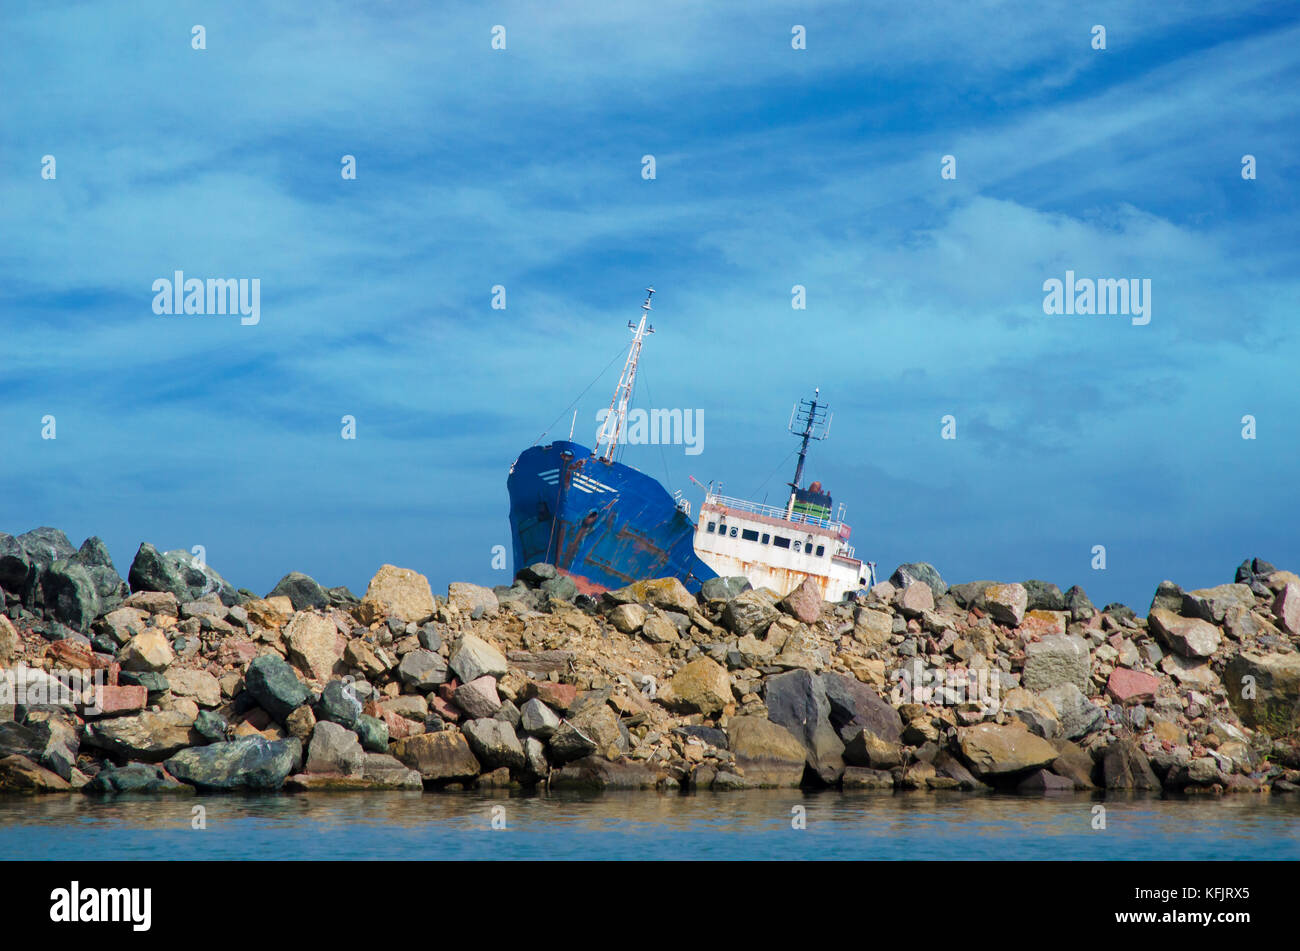 Sinking Cargo Ship High Resolution Stock Photography and Images - Alamy